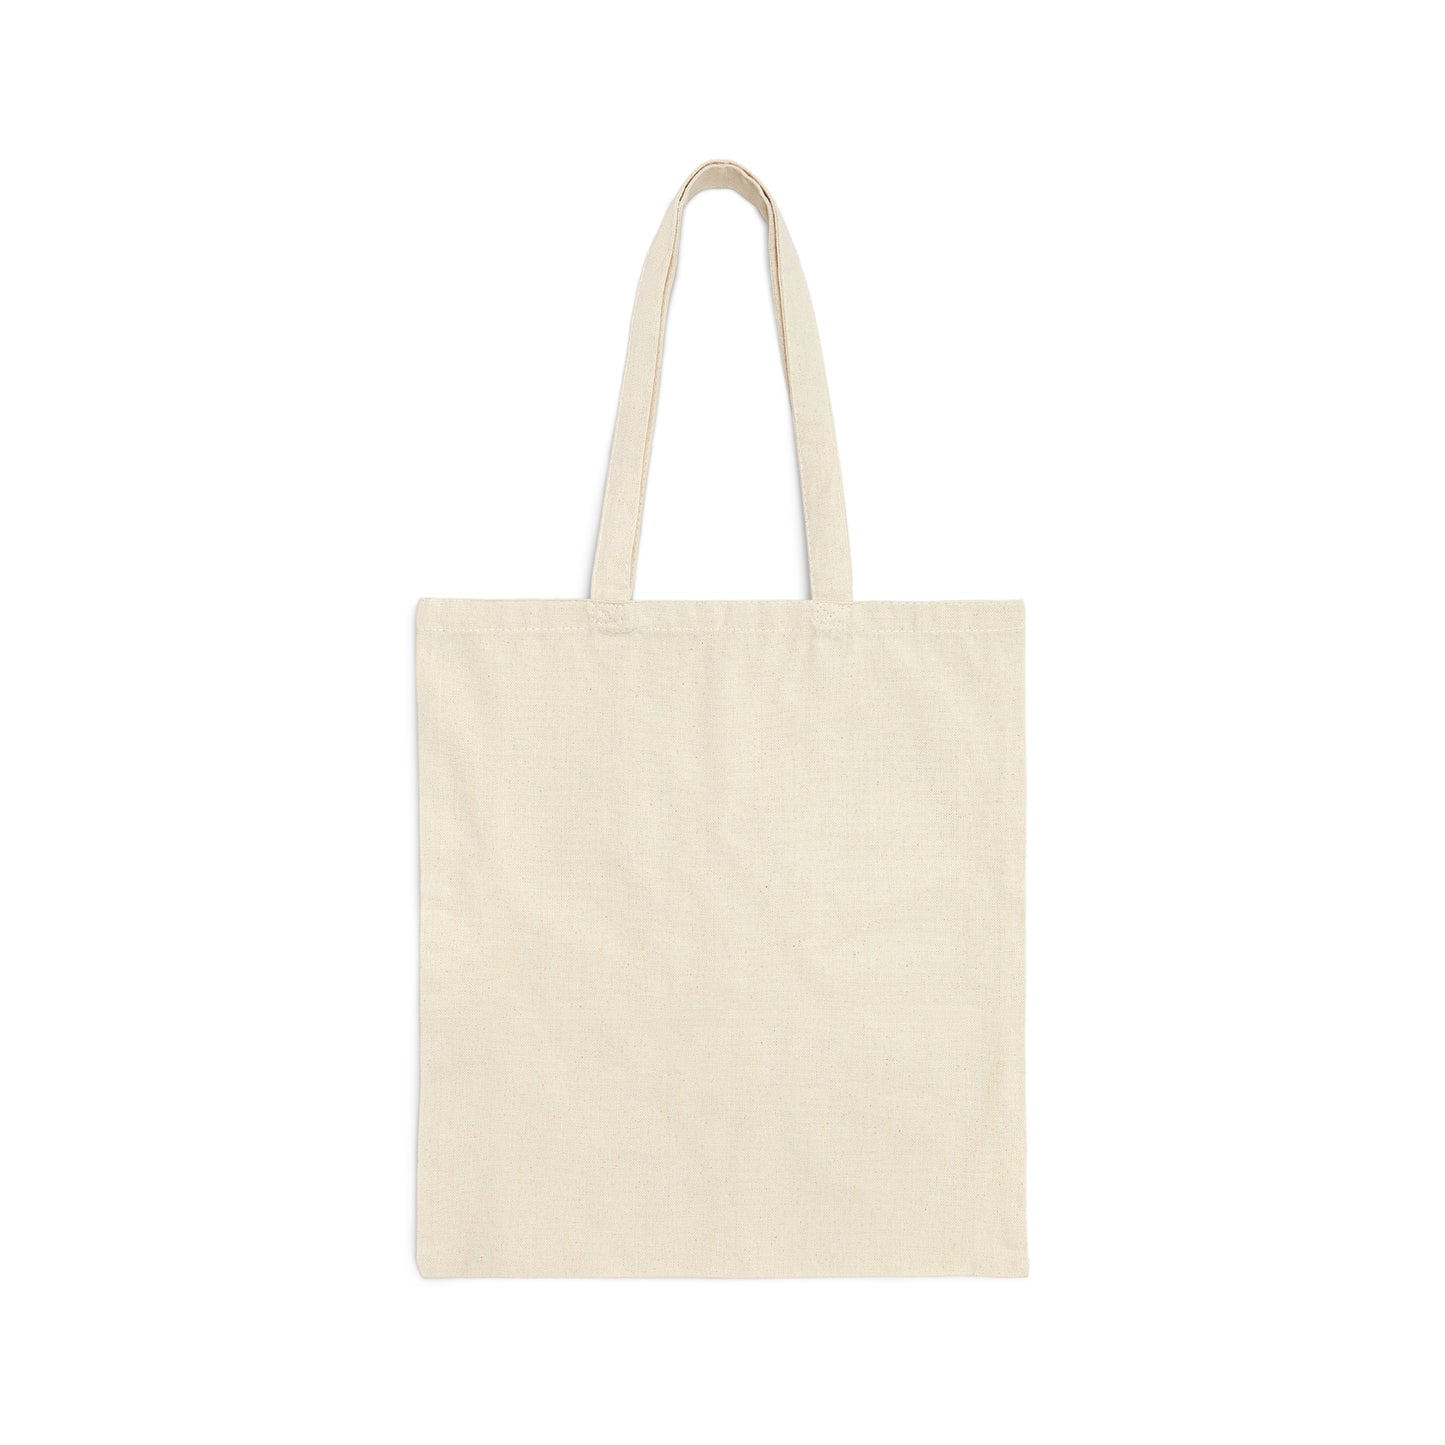 Canvas Tote Bag - White House Amid Green